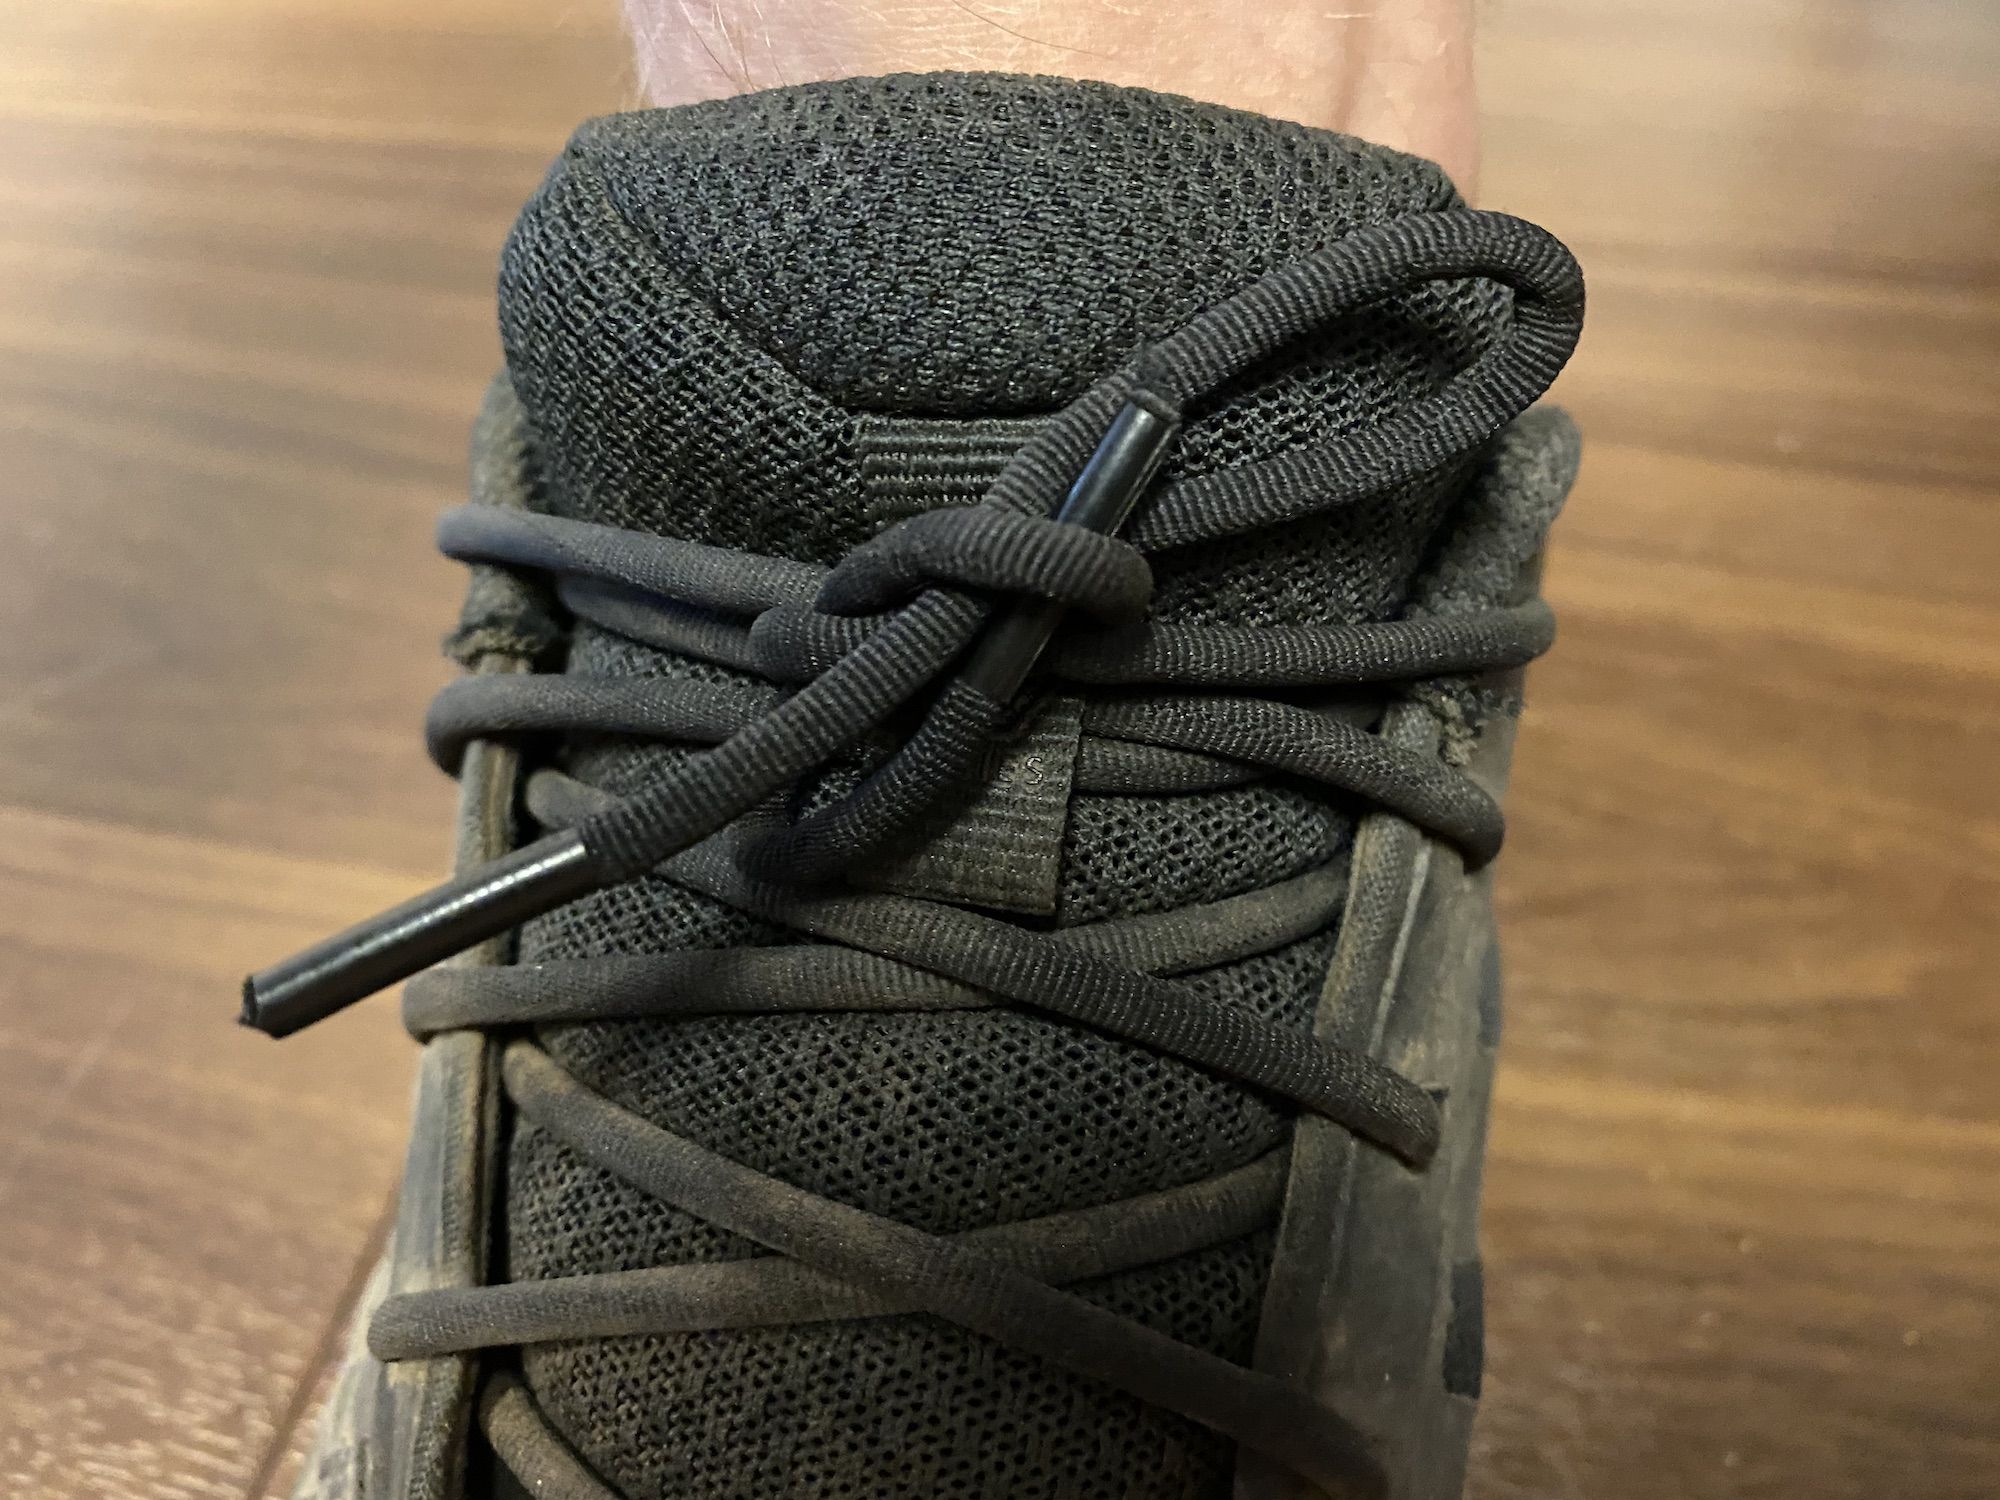 The laces on the Inov-8 Terraultra G260 are annoyingly short.